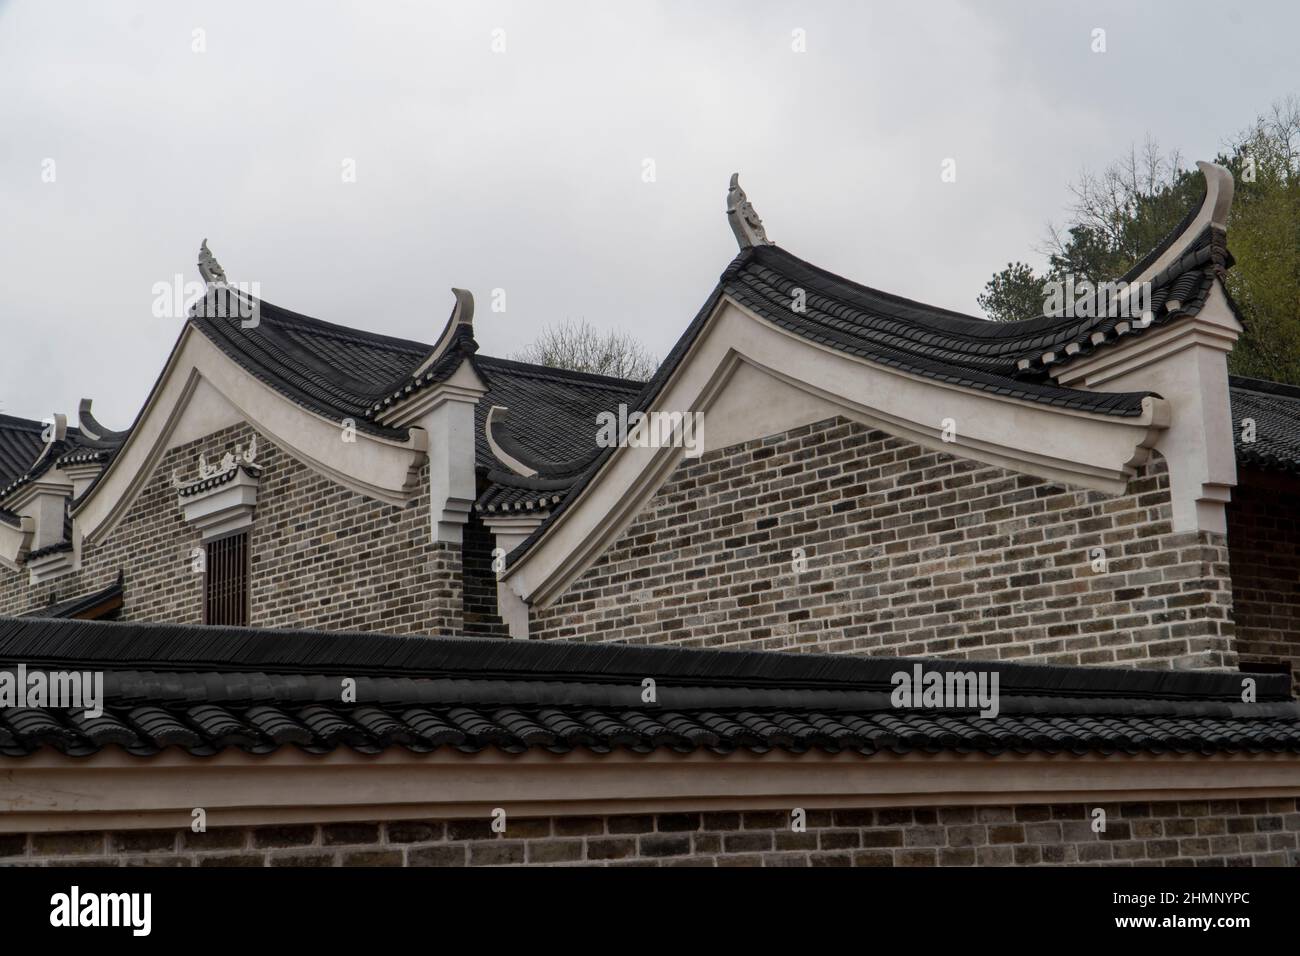 The former residence of Qiong Yao（琼瑶）, a contemporary Chinese writer, screenwriter and film and television producer in China. Stock Photo